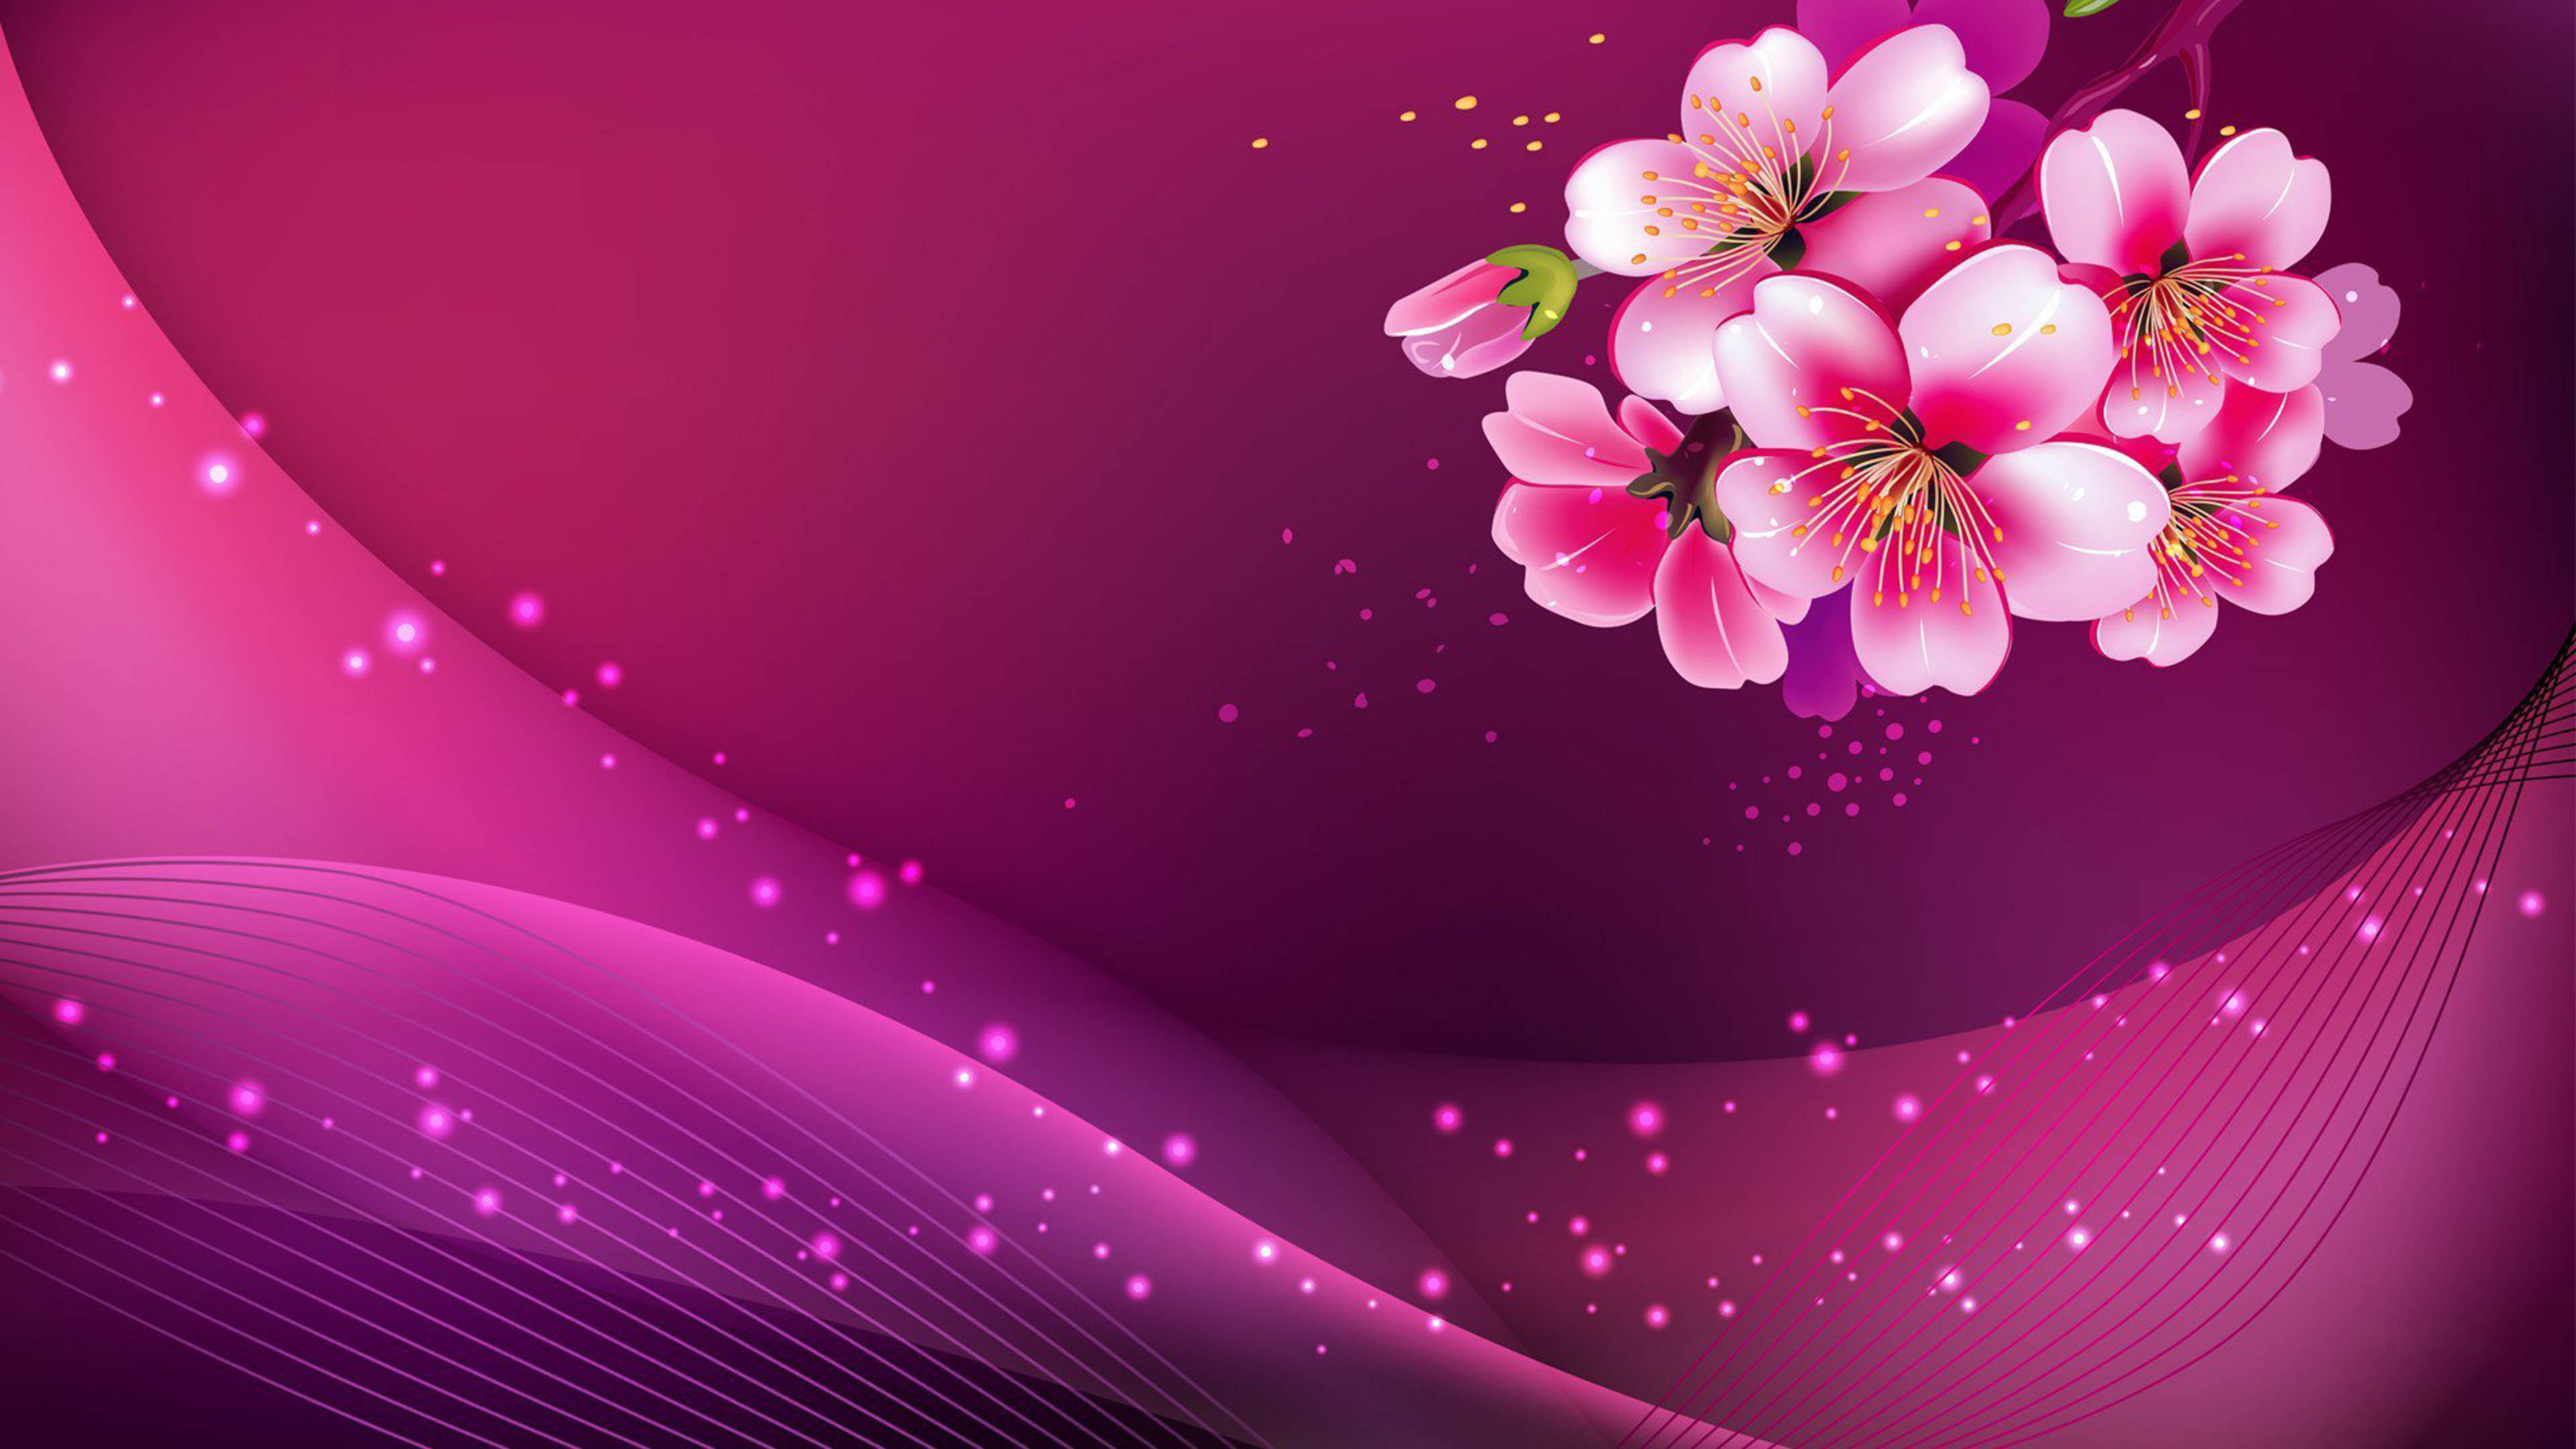 Pink Cherry Blossom And Vector Icons 3d Model Computer Wallpaper Hd